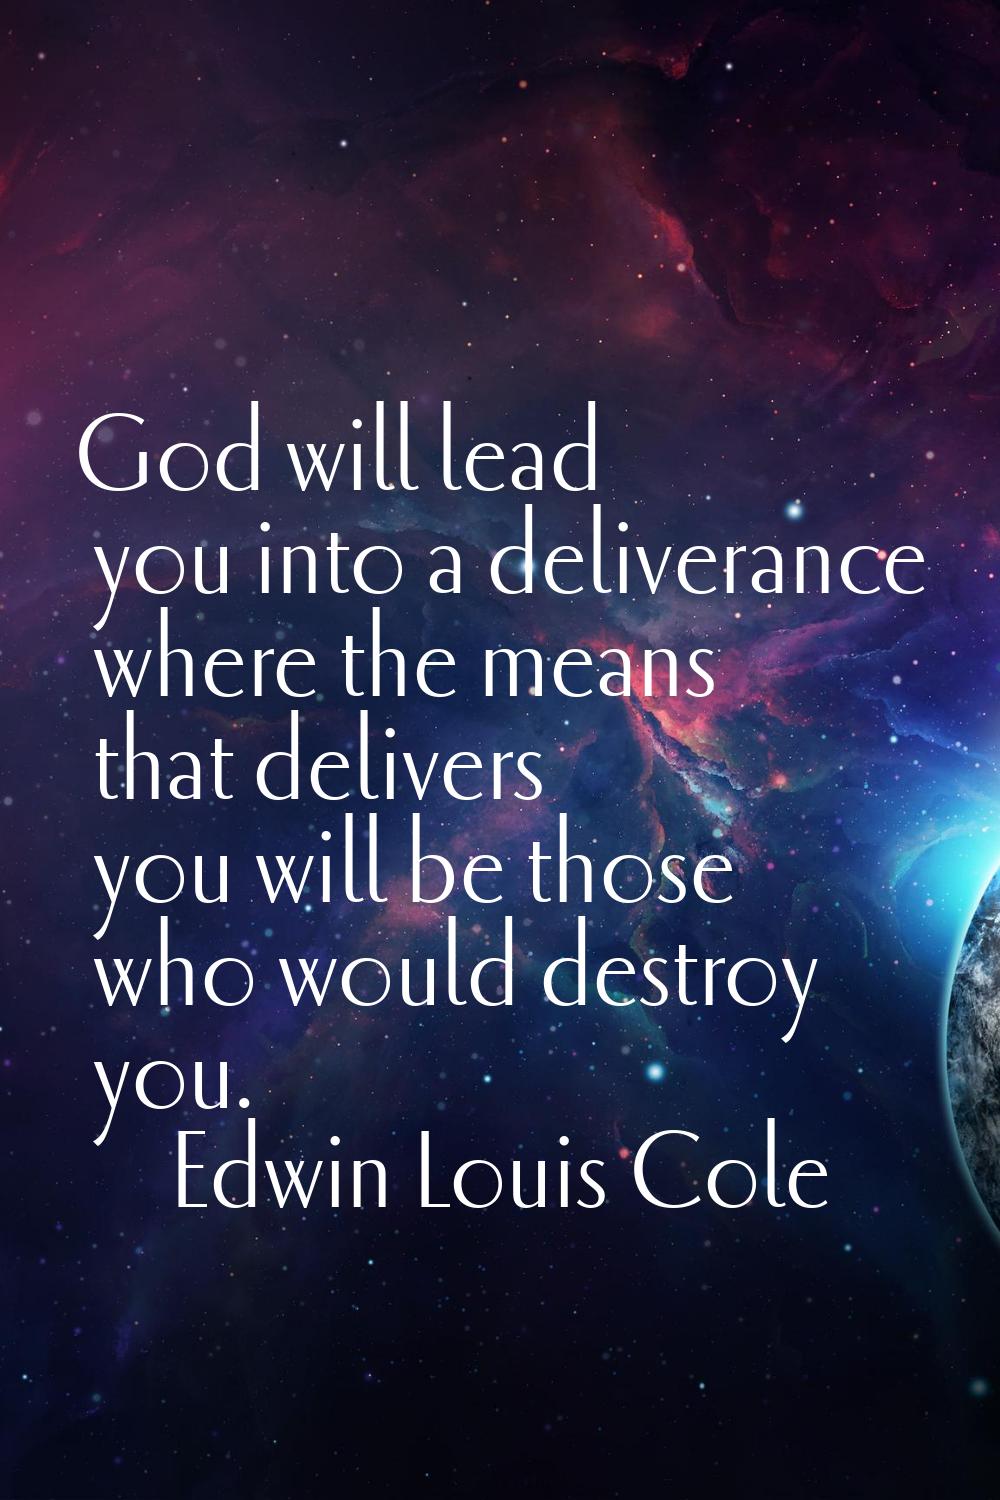 God will lead you into a deliverance where the means that delivers you will be those who would dest